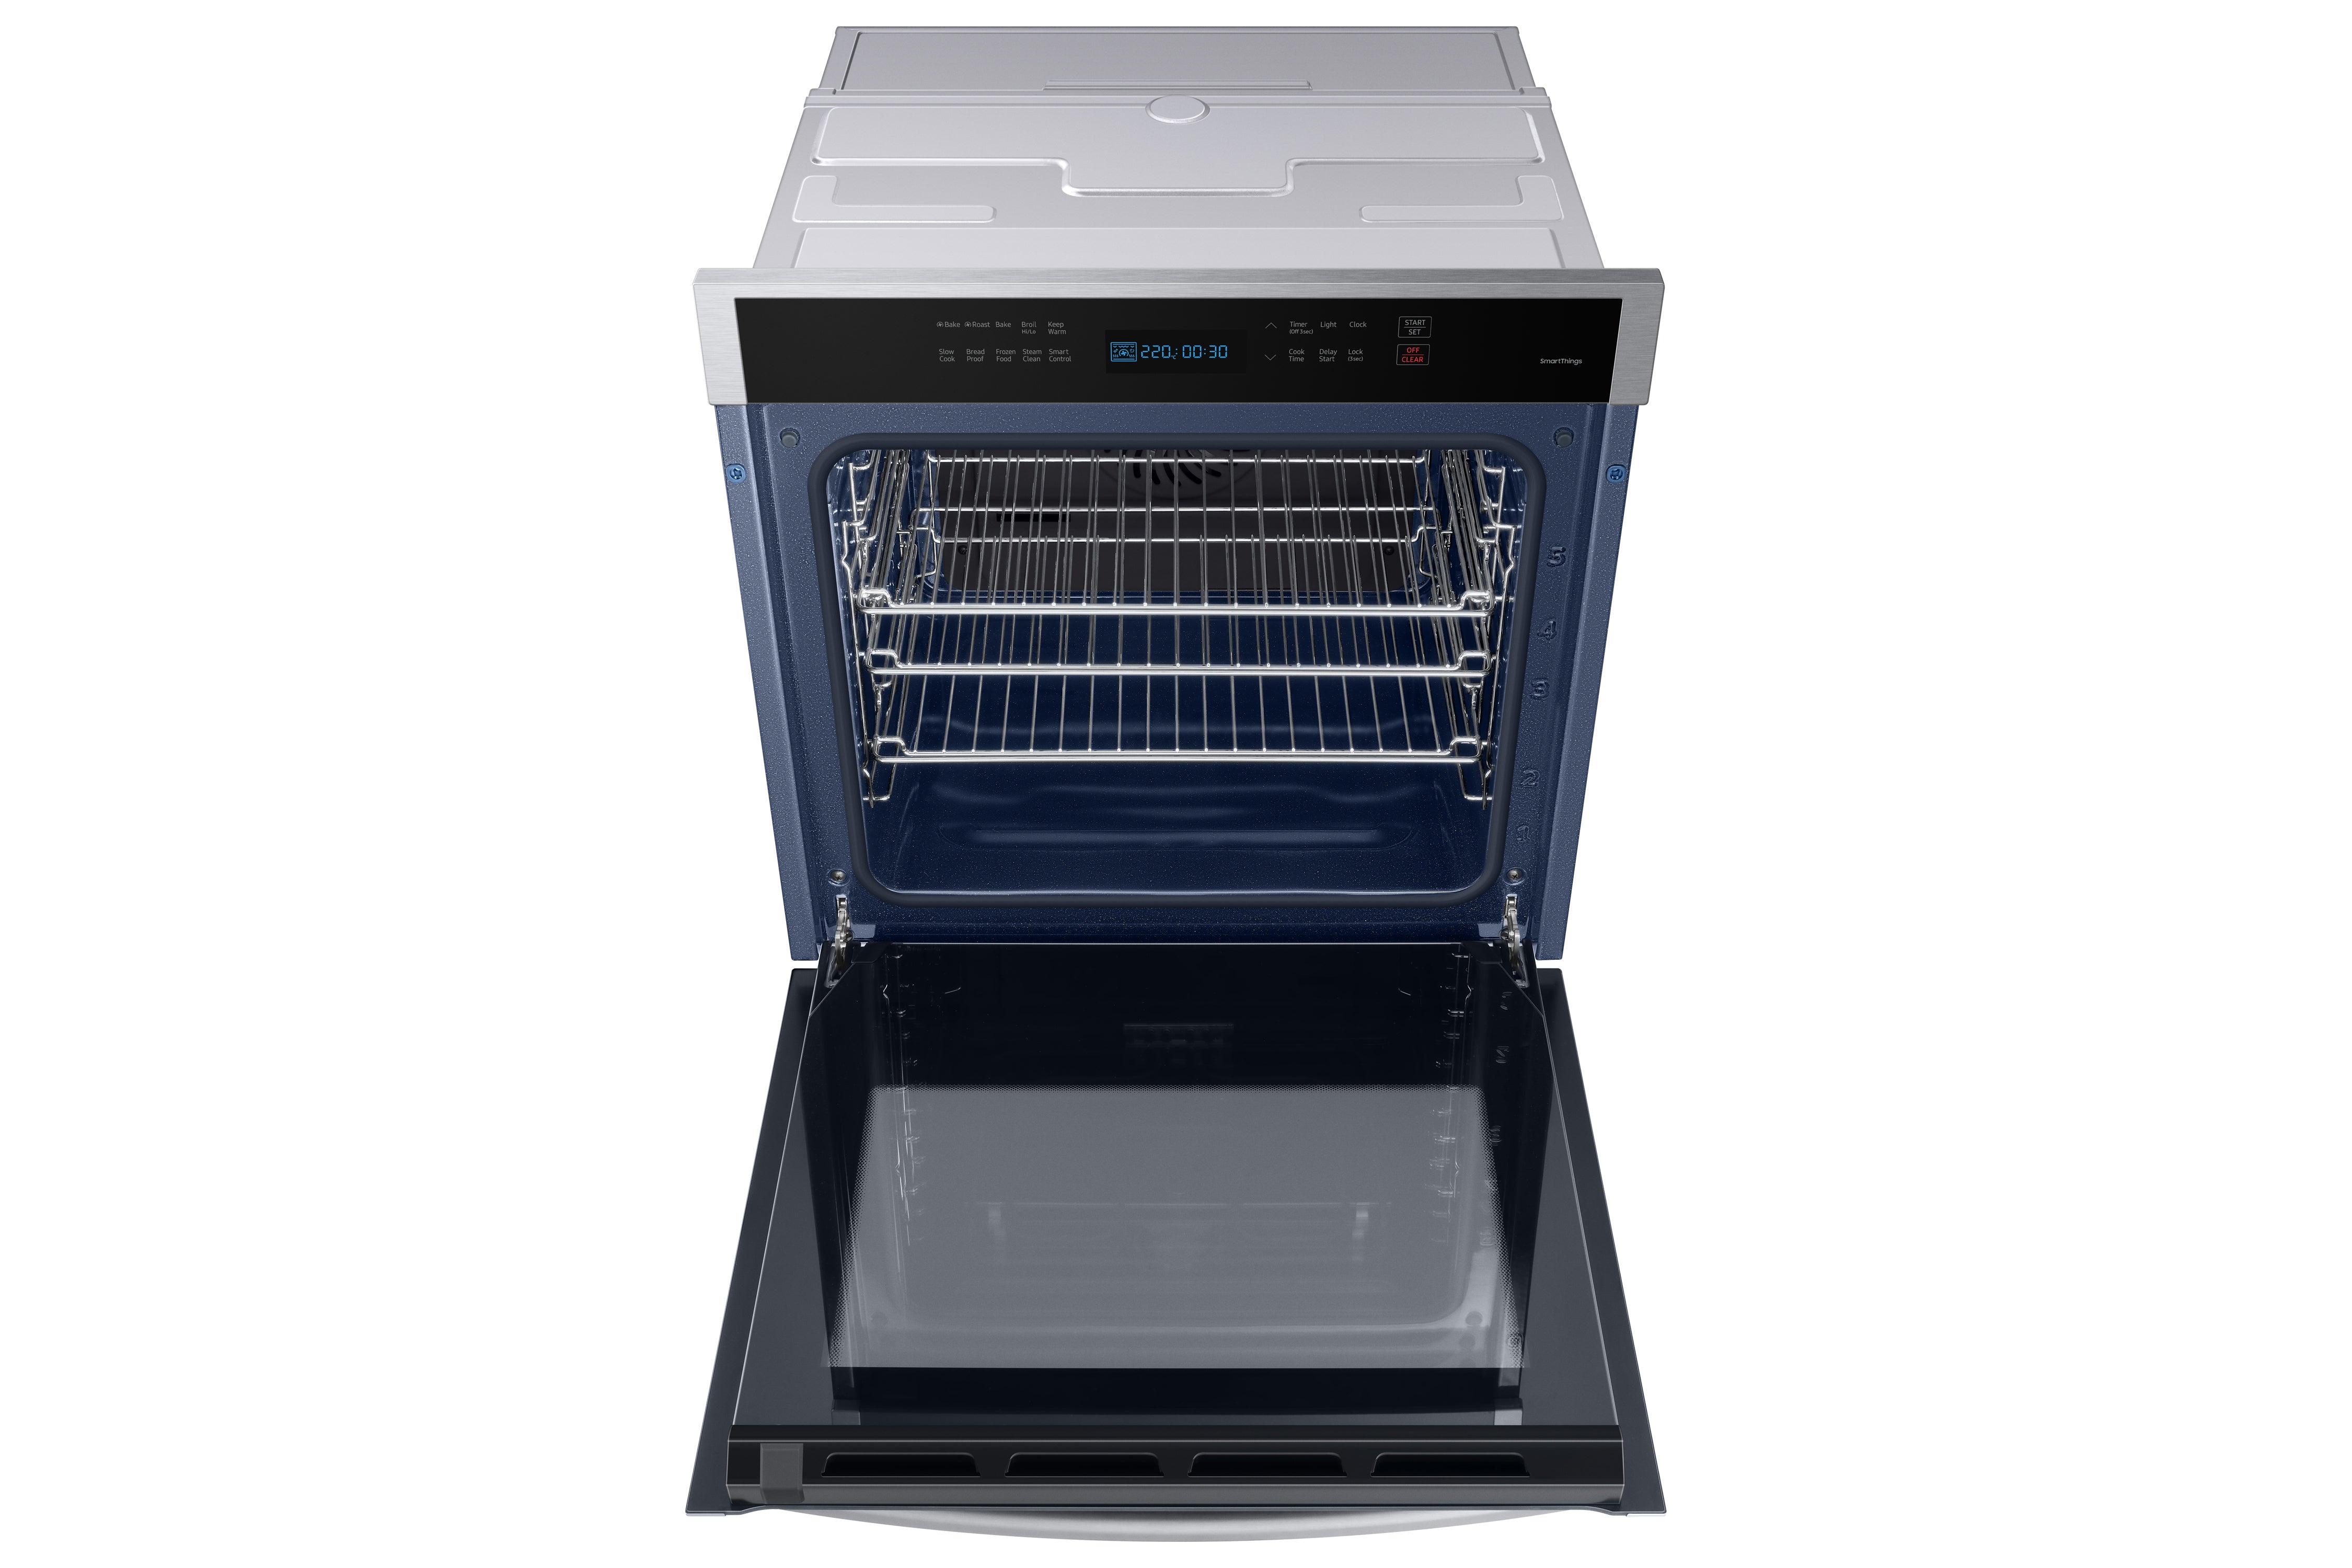 Samsung - 3.1 cu. ft Single Wall Oven in Stainless - NV31T4551SS